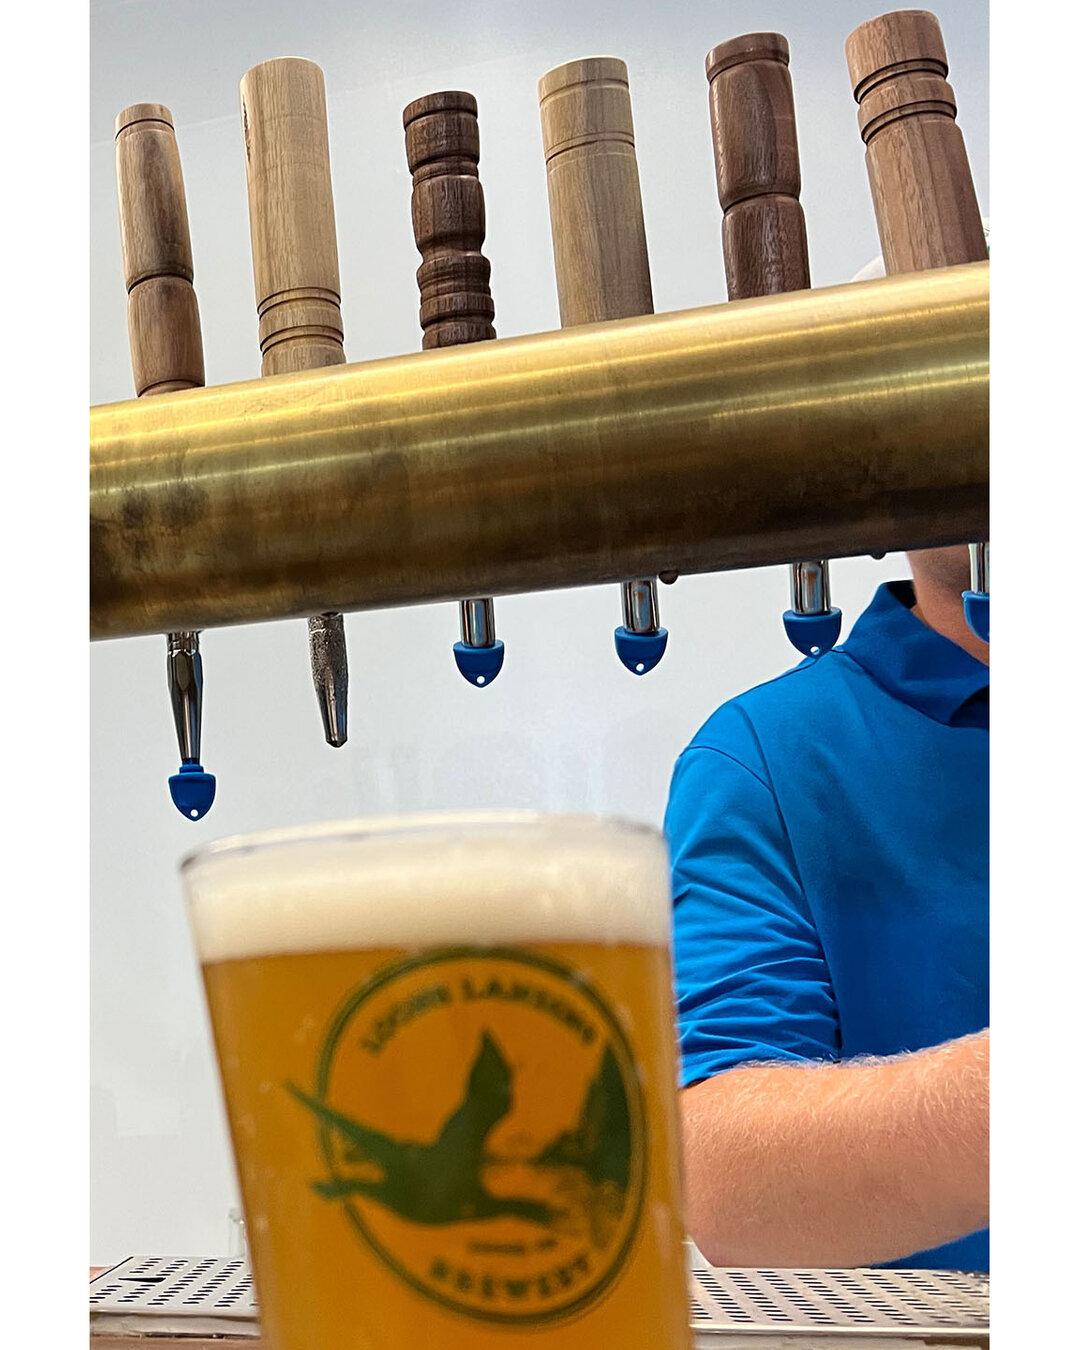 We were excited to be a part of the team to help Loon's Landing Brewery open their first Brewery and Tap Room! Congratulations and Cheers! (Insert beer cheers emoji).​​​​​​​​
.​​​​​​​​
@loonslandingbrewery​​​​​​​​
.​​​​​​​​
.​​​​​​​​
.​​​​​​​​
#erear